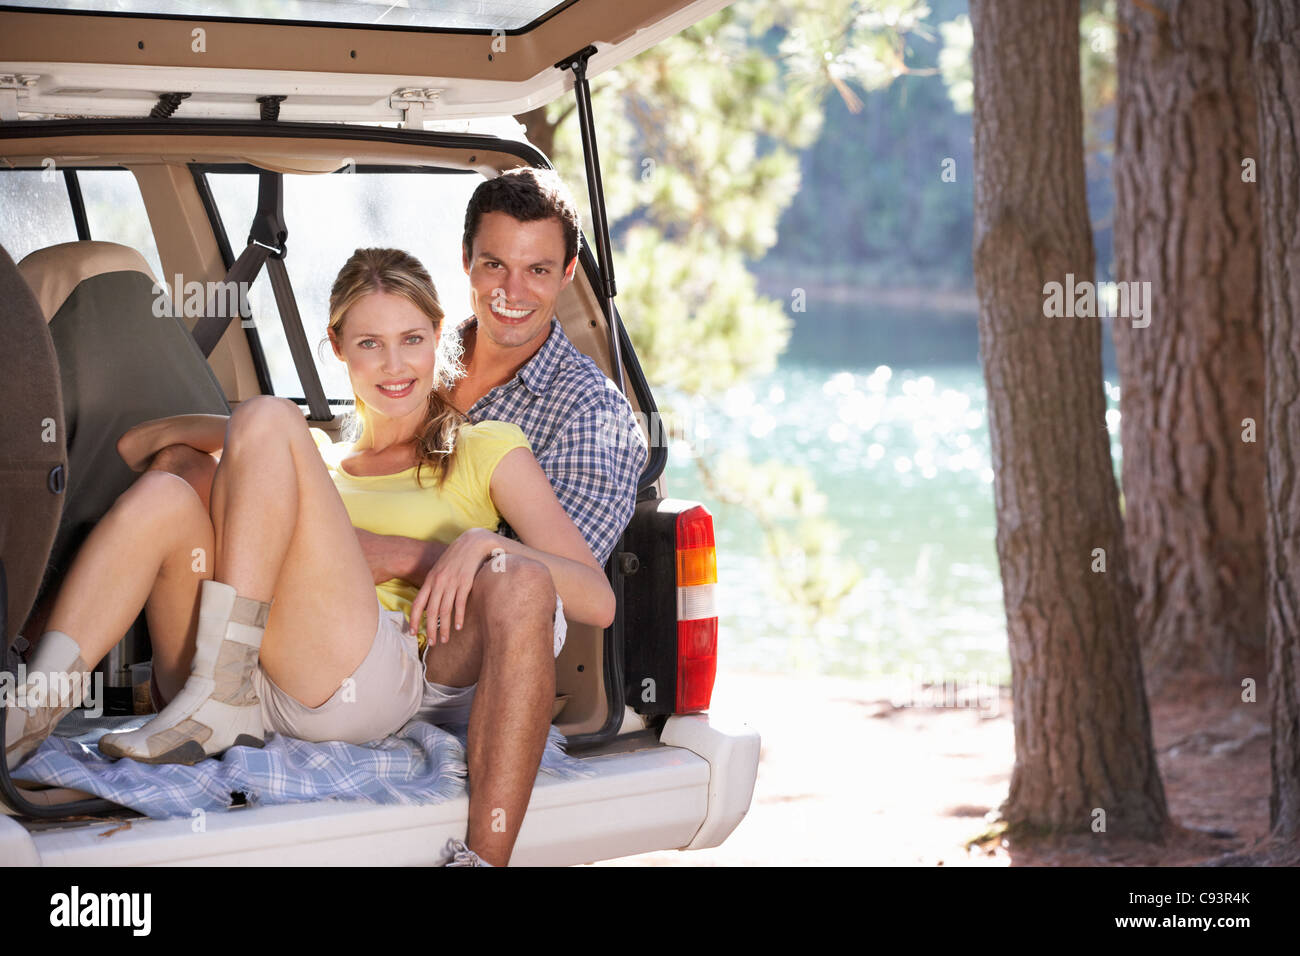 Young couple on day out in country Stock Photo